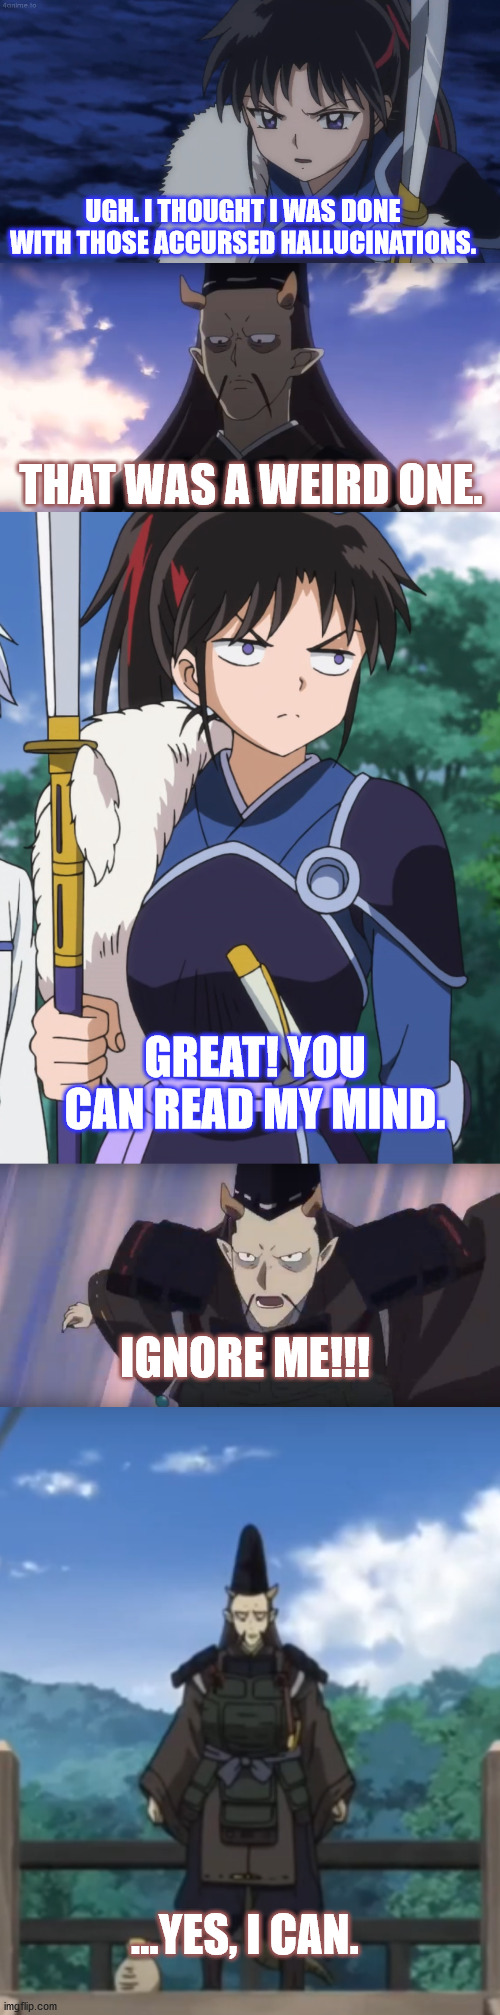 Grand Galactic Konton | UGH. I THOUGHT I WAS DONE WITH THOSE ACCURSED HALLUCINATIONS. THAT WAS A WEIRD ONE. GREAT! YOU CAN READ MY MIND. IGNORE ME!!! ...YES, I CAN. | image tagged in yashahime,inuyasha,venture bros,funny,parody,meme | made w/ Imgflip meme maker